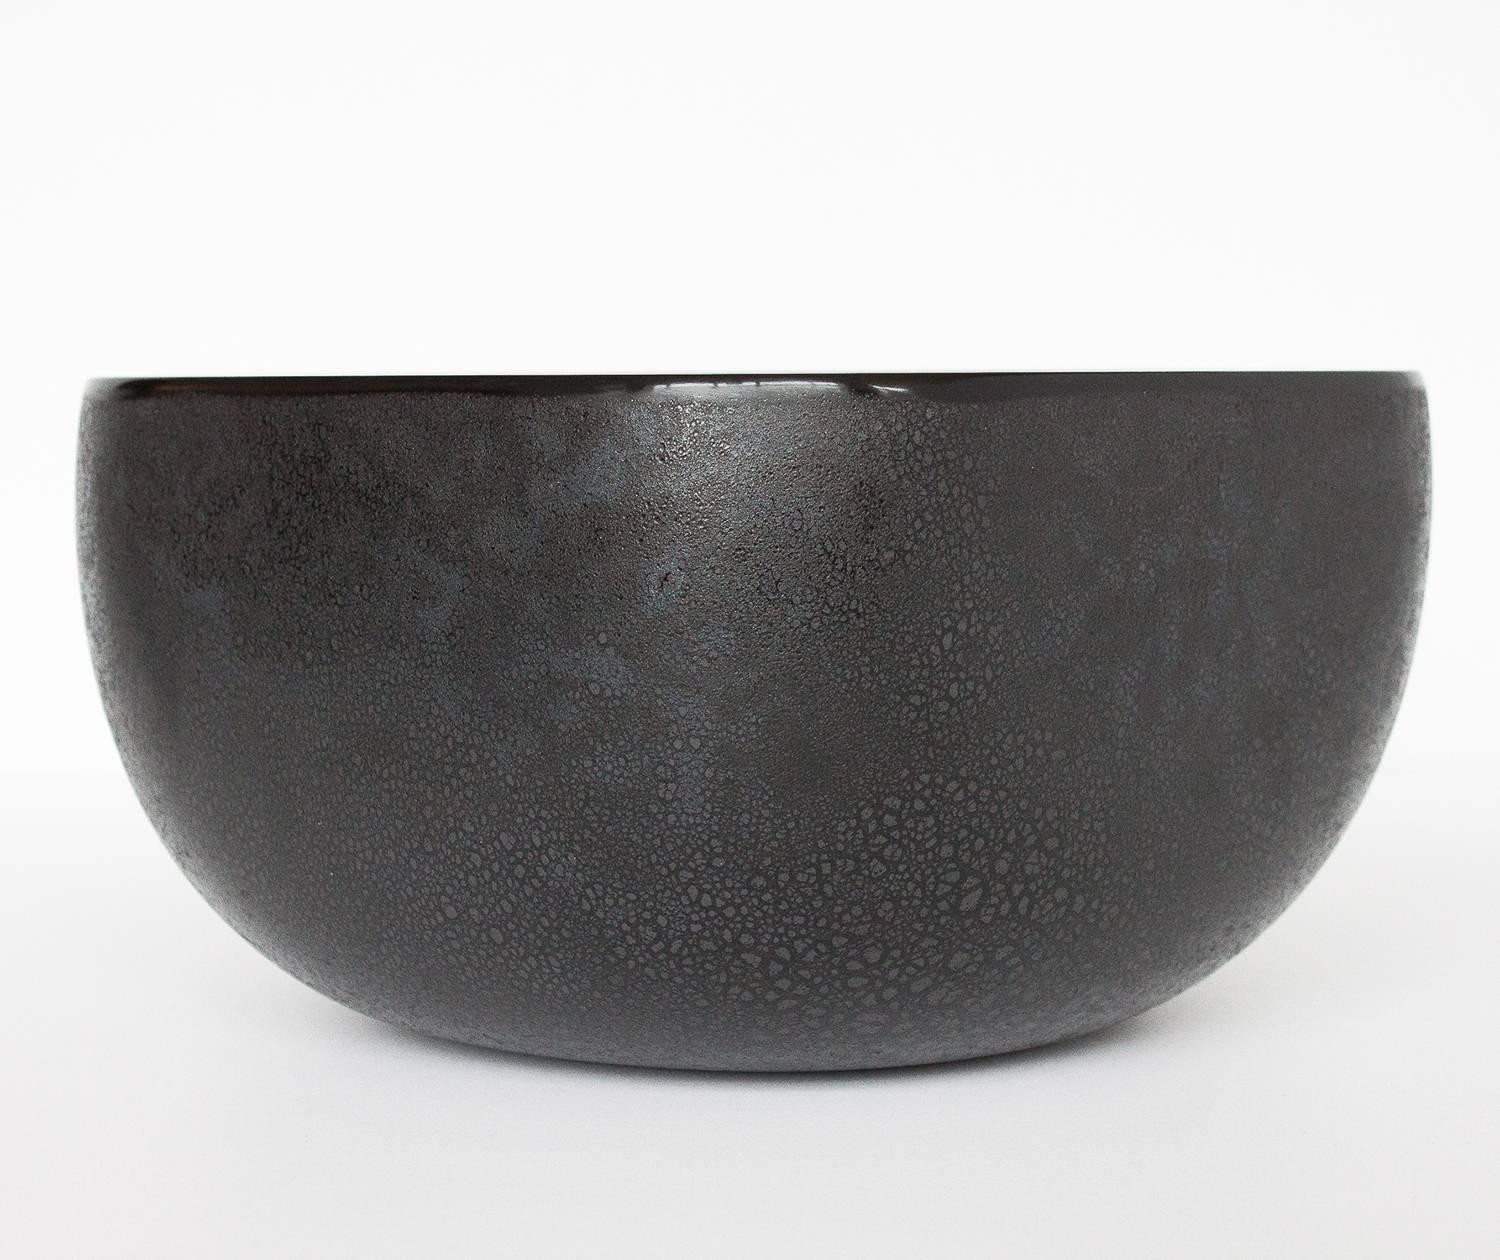 Barbini Murano large black art glass bowl with textured and frosted scavo or corroso technique. Engraved signature to bottom of bowl and numbered 310. Very tiny flea-bite chip on flat edge of glass rim. See photos.

 

 